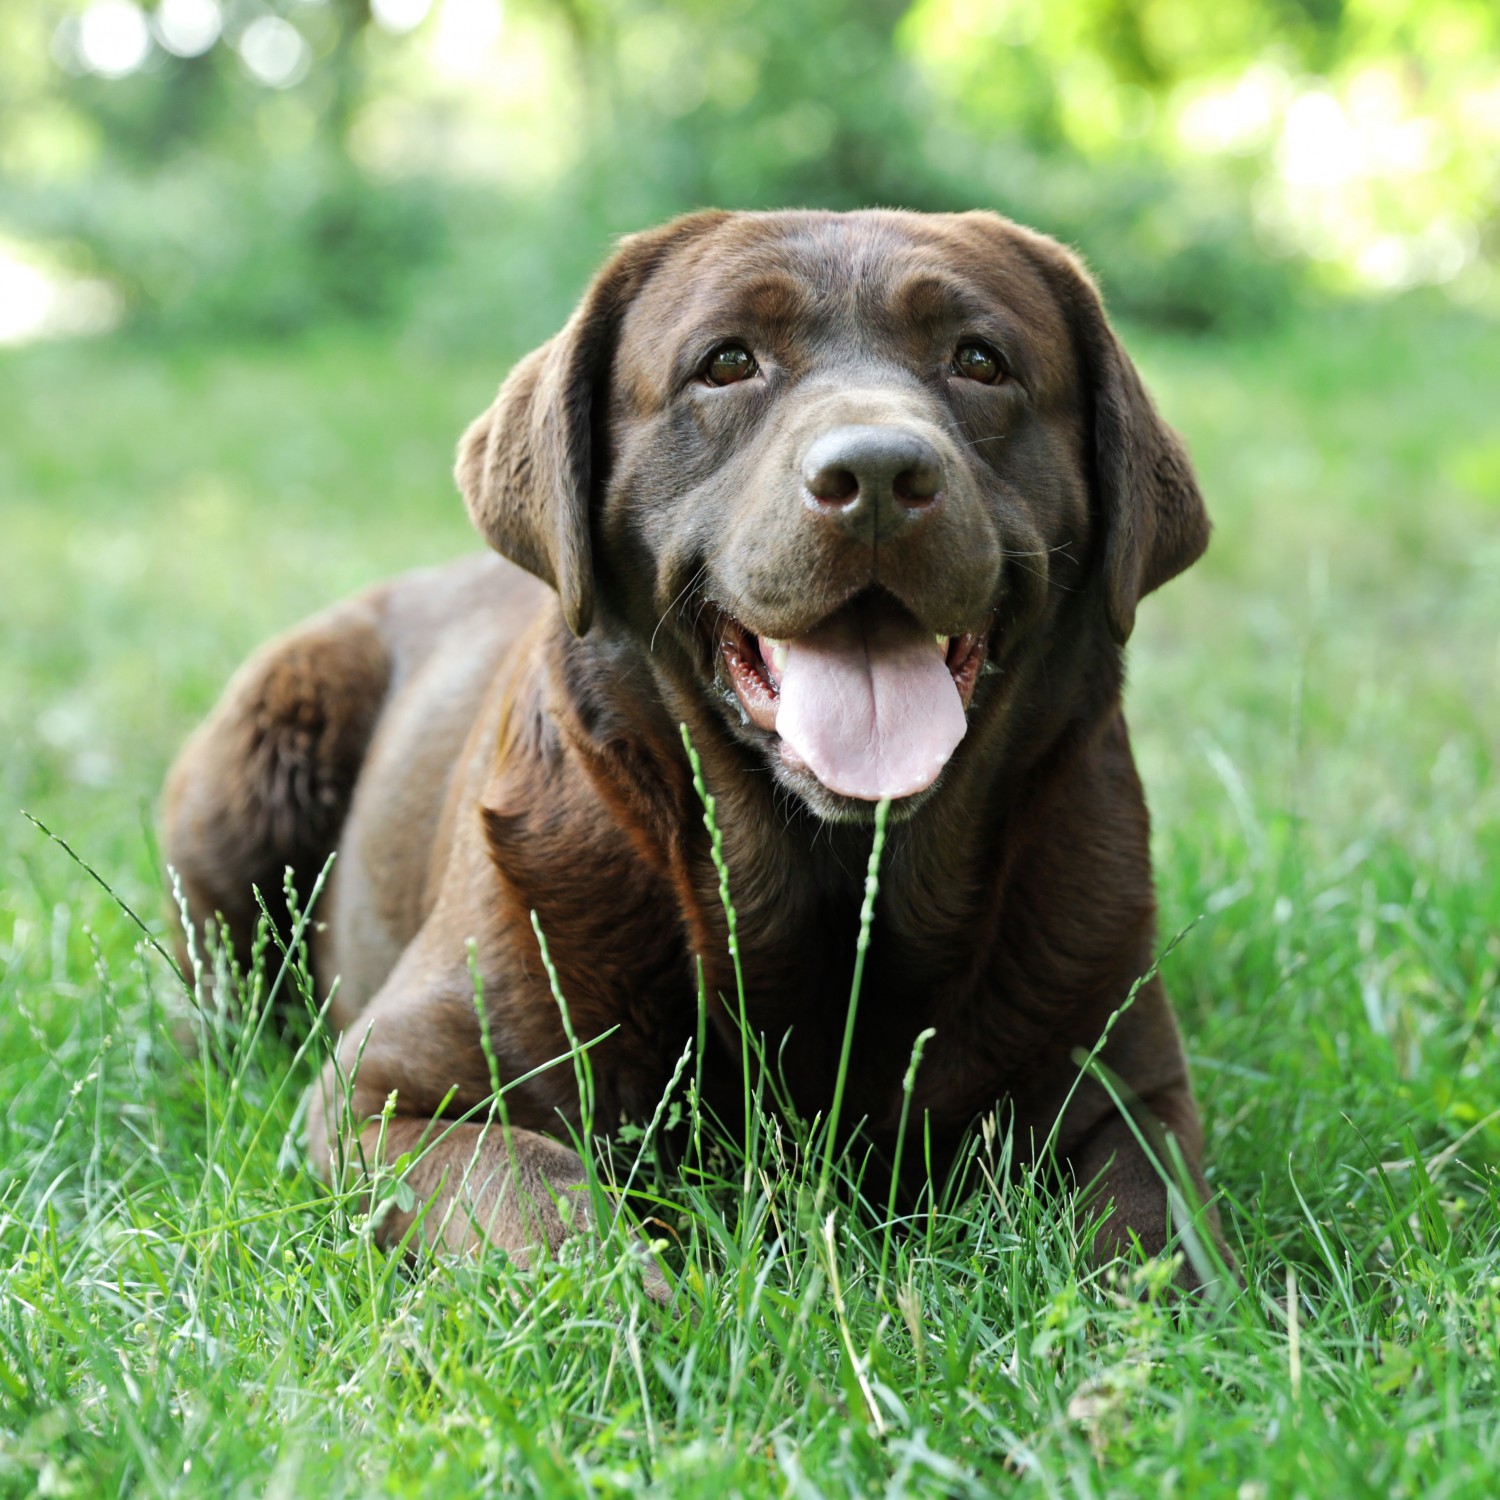 Chocolate lab in grass on a sunny day